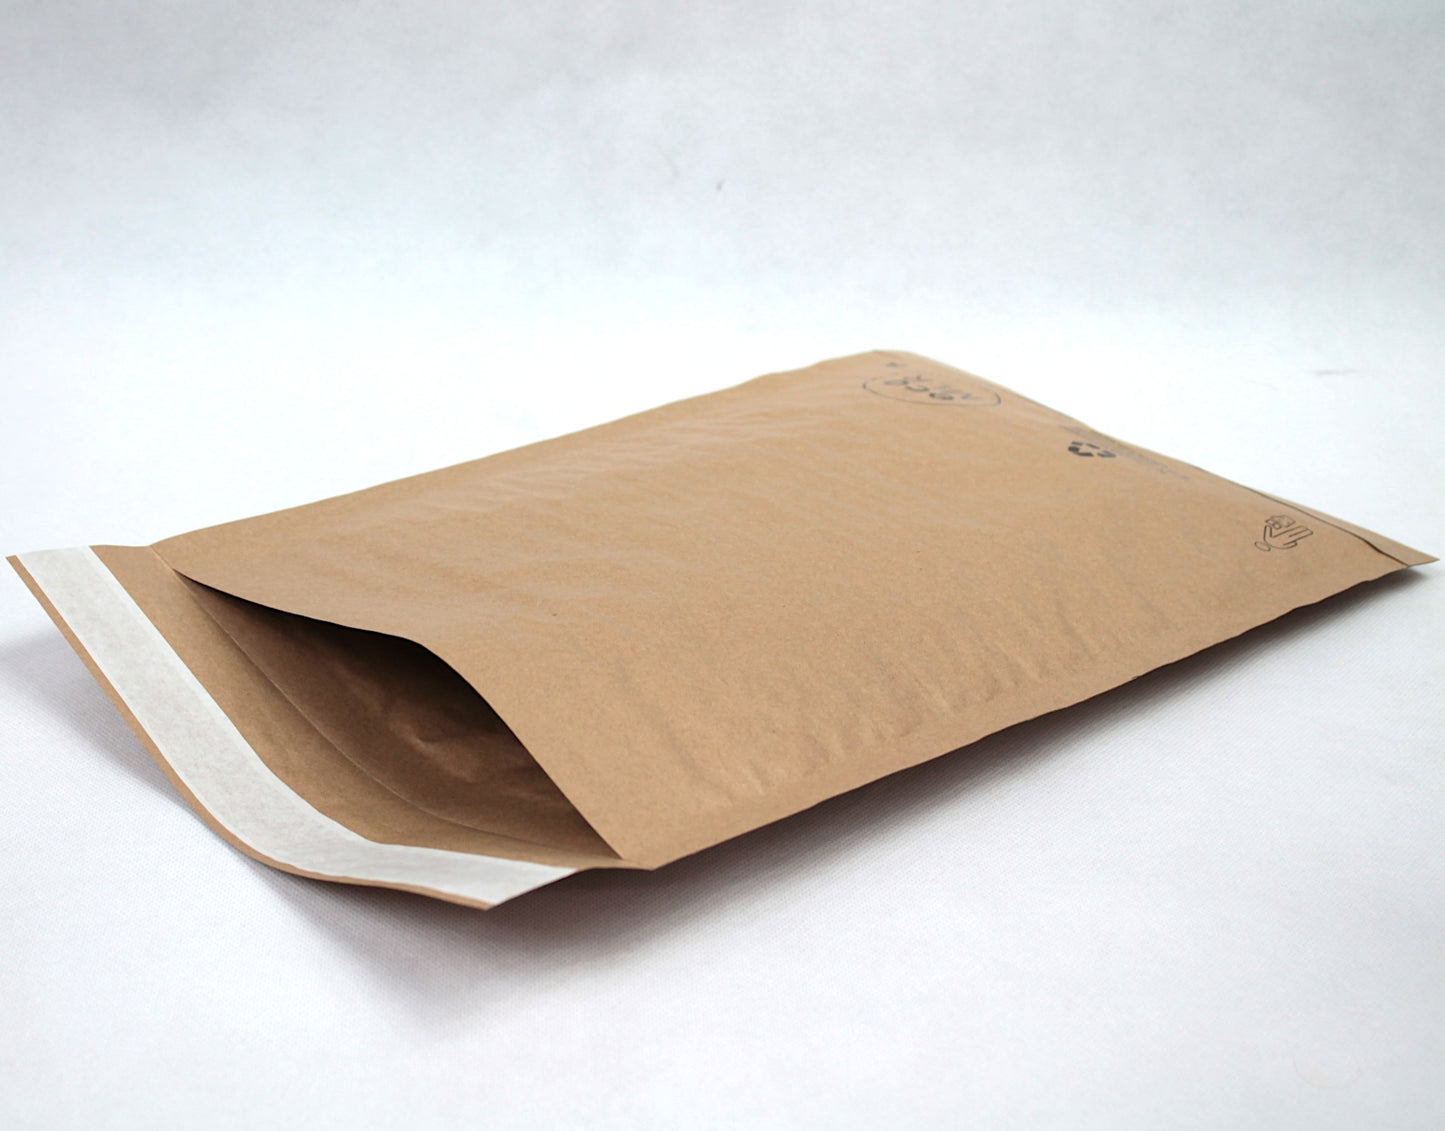 335x223mm Recyclable Padded Envelopes - Pack of 50